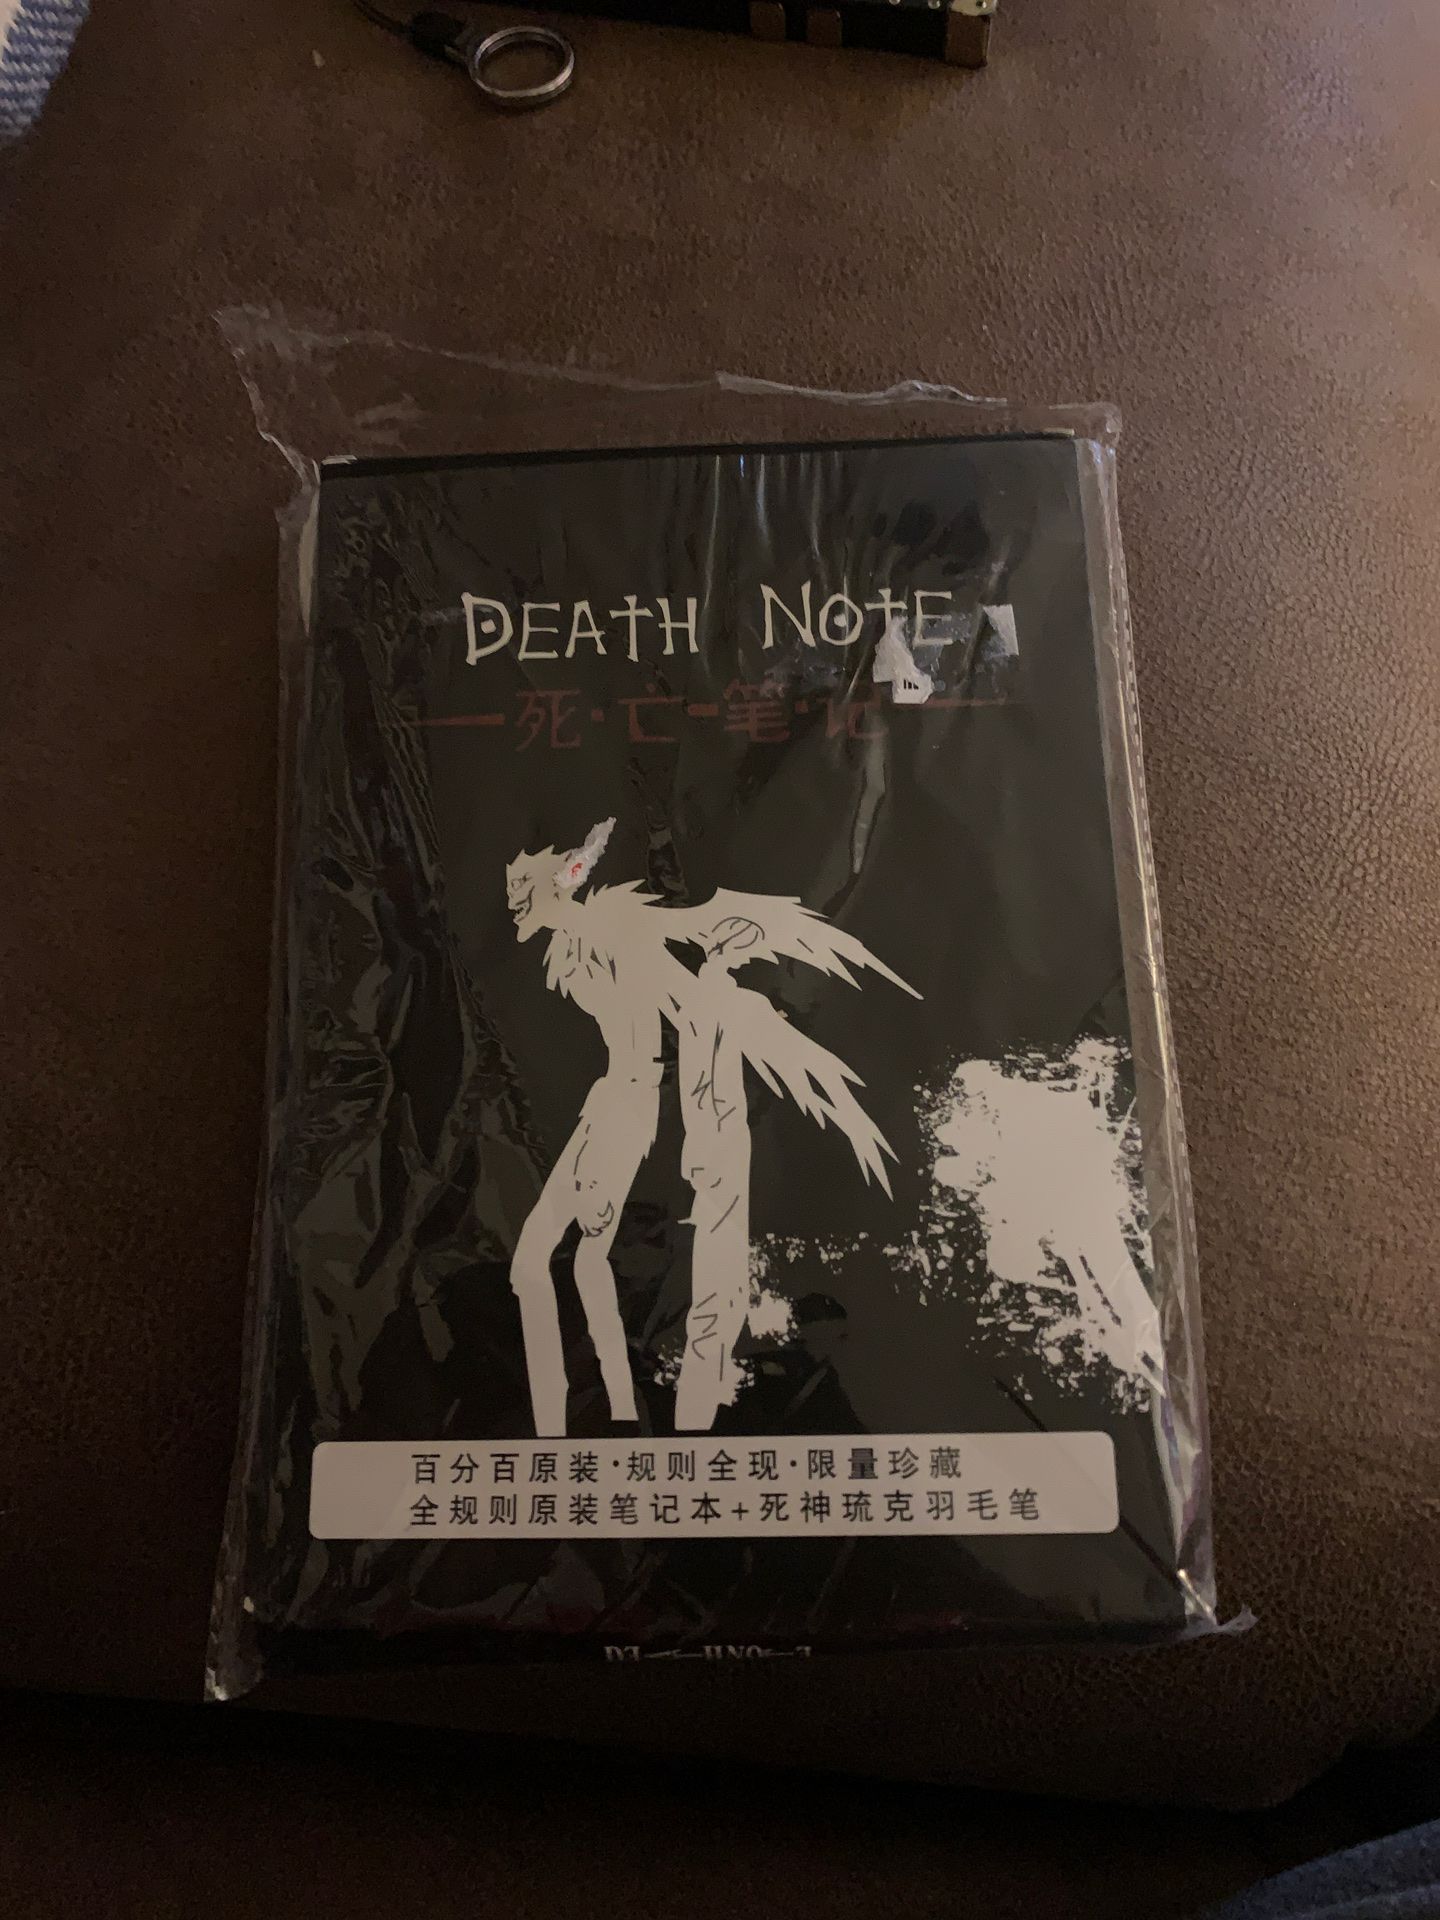 Death note book never used before